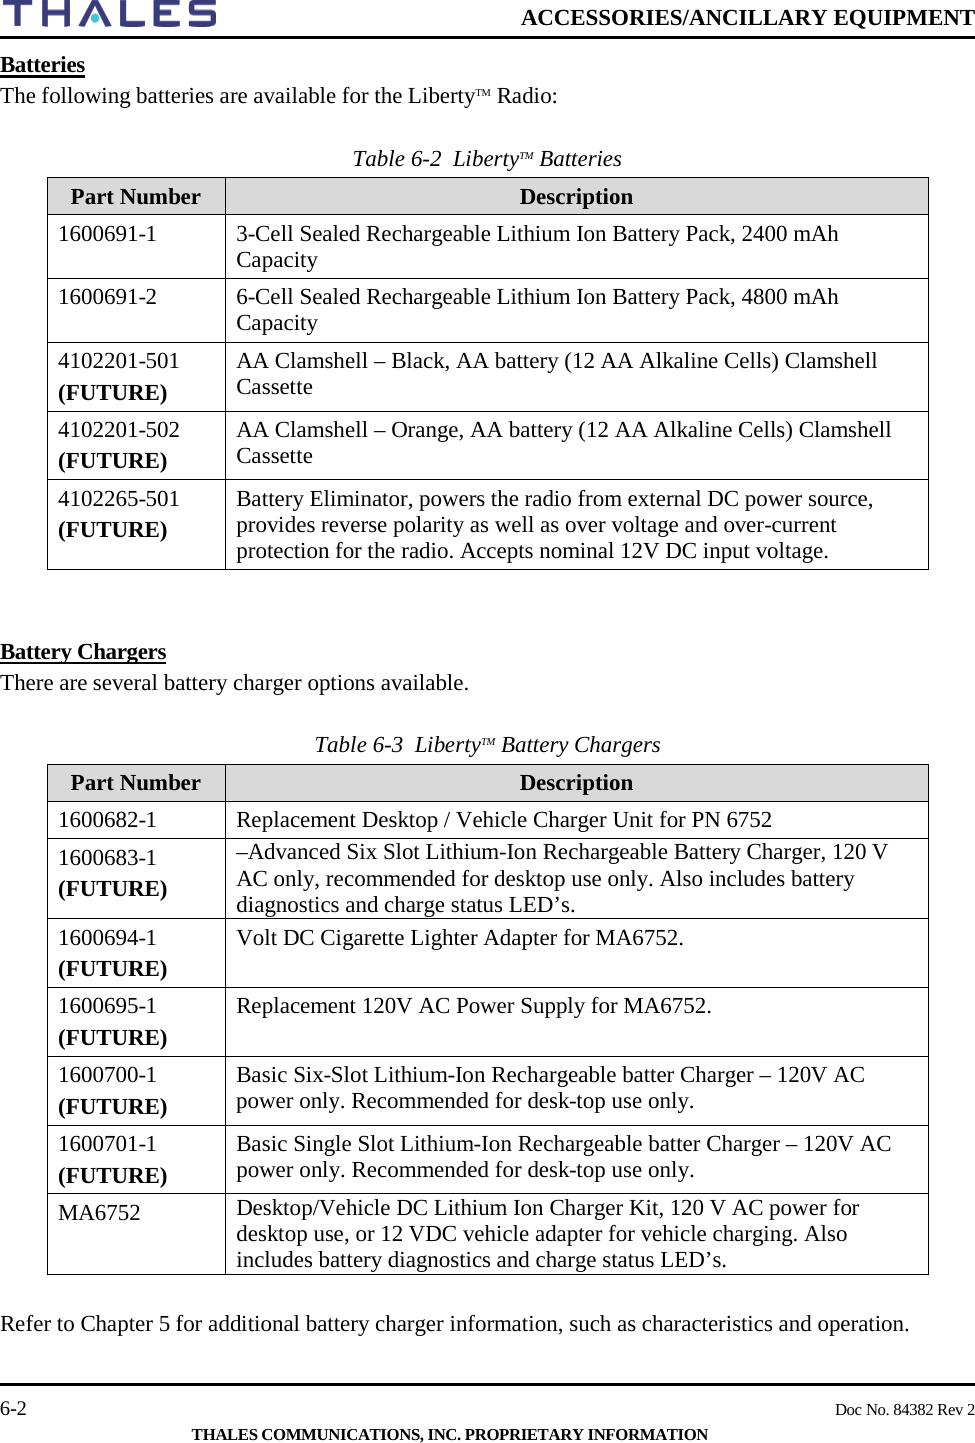  ACCESSORIES/ANCILLARY EQUIPMENT   6-2    Doc No. 84382 Rev 2  THALES COMMUNICATIONS, INC. PROPRIETARY INFORMATION Batteries  The following batteries are available for the LibertyTM Radio:  Table 6-2  LibertyTM Batteries  Part Number Description 1600691-1  3-Cell Sealed Rechargeable Lithium Ion Battery Pack, 2400 mAh Capacity 1600691-2  6-Cell Sealed Rechargeable Lithium Ion Battery Pack, 4800 mAh Capacity 4102201-501 (FUTURE) AA Clamshell – Black, AA battery (12 AA Alkaline Cells) Clamshell Cassette  4102201-502 (FUTURE) AA Clamshell – Orange, AA battery (12 AA Alkaline Cells) Clamshell Cassette 4102265-501 (FUTURE) Battery Eliminator, powers the radio from external DC power source, provides reverse polarity as well as over voltage and over-current protection for the radio. Accepts nominal 12V DC input voltage.   Battery Chargers There are several battery charger options available.     Table 6-3  LibertyTM Battery Chargers Part Number Description 1600682-1  Replacement Desktop / Vehicle Charger Unit for PN 6752 1600683-1 (FUTURE) –Advanced Six Slot Lithium-Ion Rechargeable Battery Charger, 120 V AC only, recommended for desktop use only. Also includes battery diagnostics and charge status LED’s. 1600694-1 (FUTURE) Volt DC Cigarette Lighter Adapter for MA6752. 1600695-1 (FUTURE) Replacement 120V AC Power Supply for MA6752. 1600700-1 (FUTURE) Basic Six-Slot Lithium-Ion Rechargeable batter Charger – 120V AC power only. Recommended for desk-top use only.  1600701-1 (FUTURE) Basic Single Slot Lithium-Ion Rechargeable batter Charger – 120V AC power only. Recommended for desk-top use only.  MA6752 Desktop/Vehicle DC Lithium Ion Charger Kit, 120 V AC power for desktop use, or 12 VDC vehicle adapter for vehicle charging. Also includes battery diagnostics and charge status LED’s.  Refer to Chapter 5 for additional battery charger information, such as characteristics and operation. 